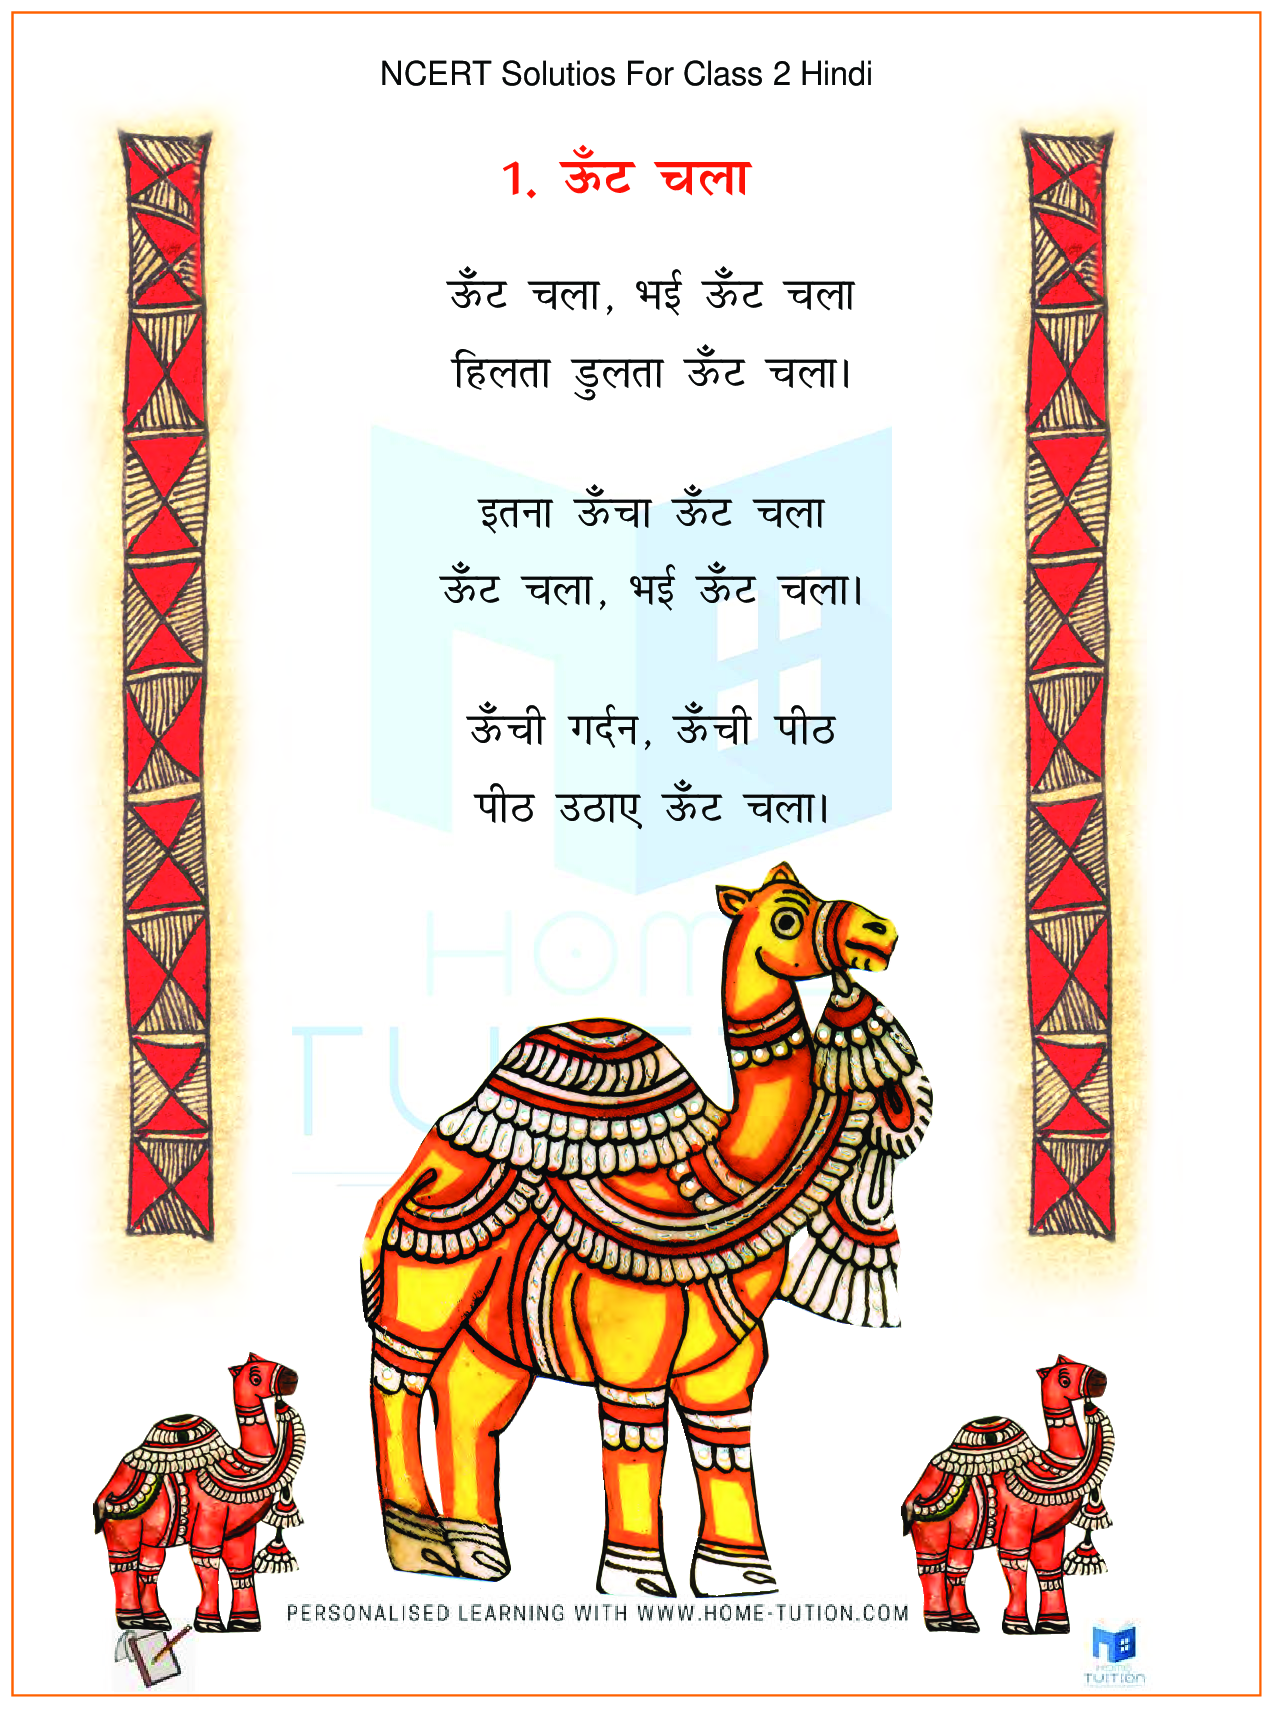 NCERT Solutions for Class 2 Hindi ऊँट चला